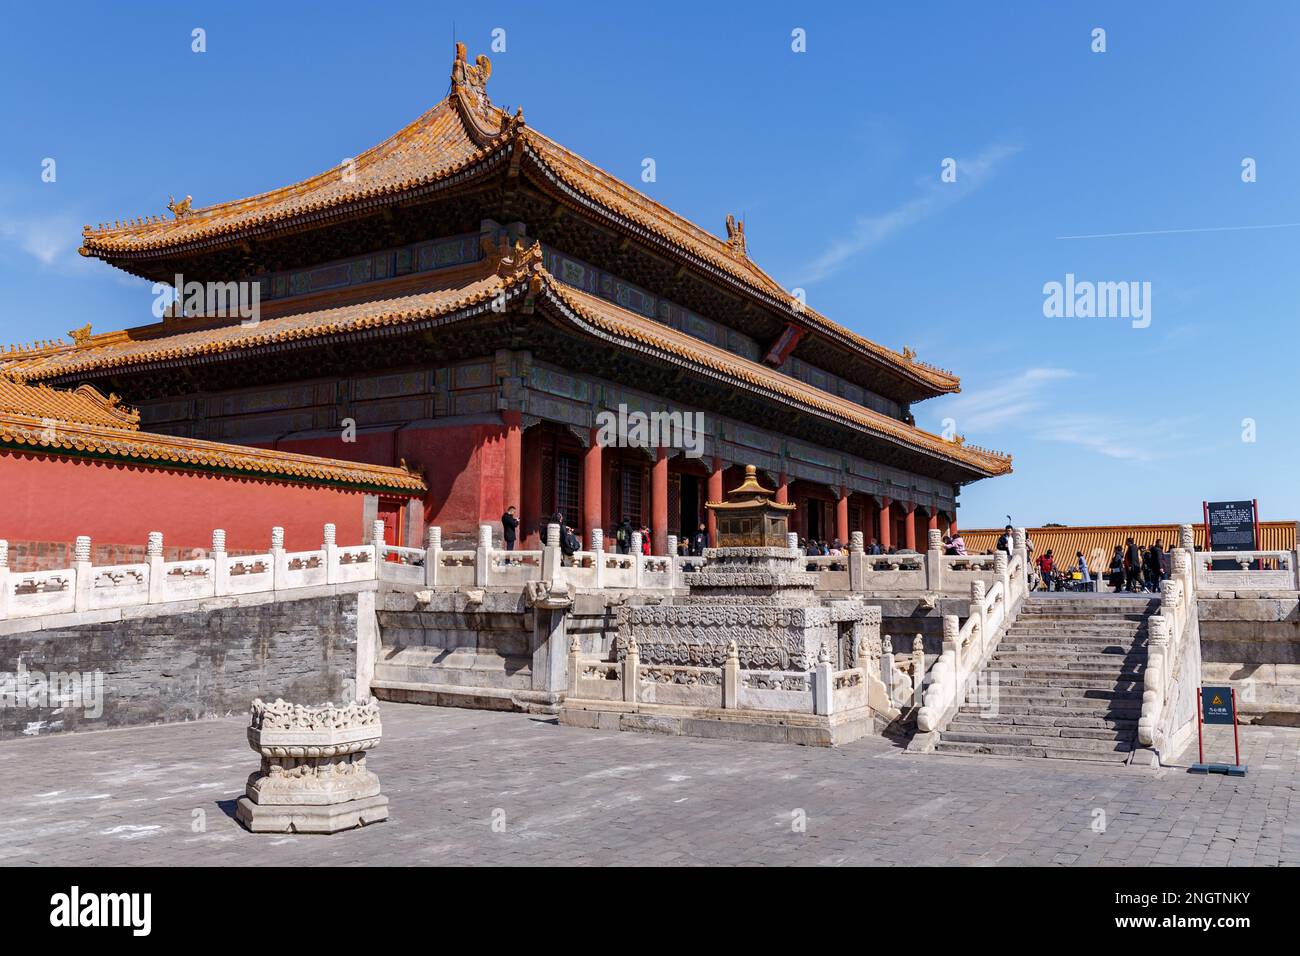 BEIJING; CHINA - MARCH 14, 2018: Impressions from the Forbidden City in Beijing, China on March 14, 2018. Stock Photo